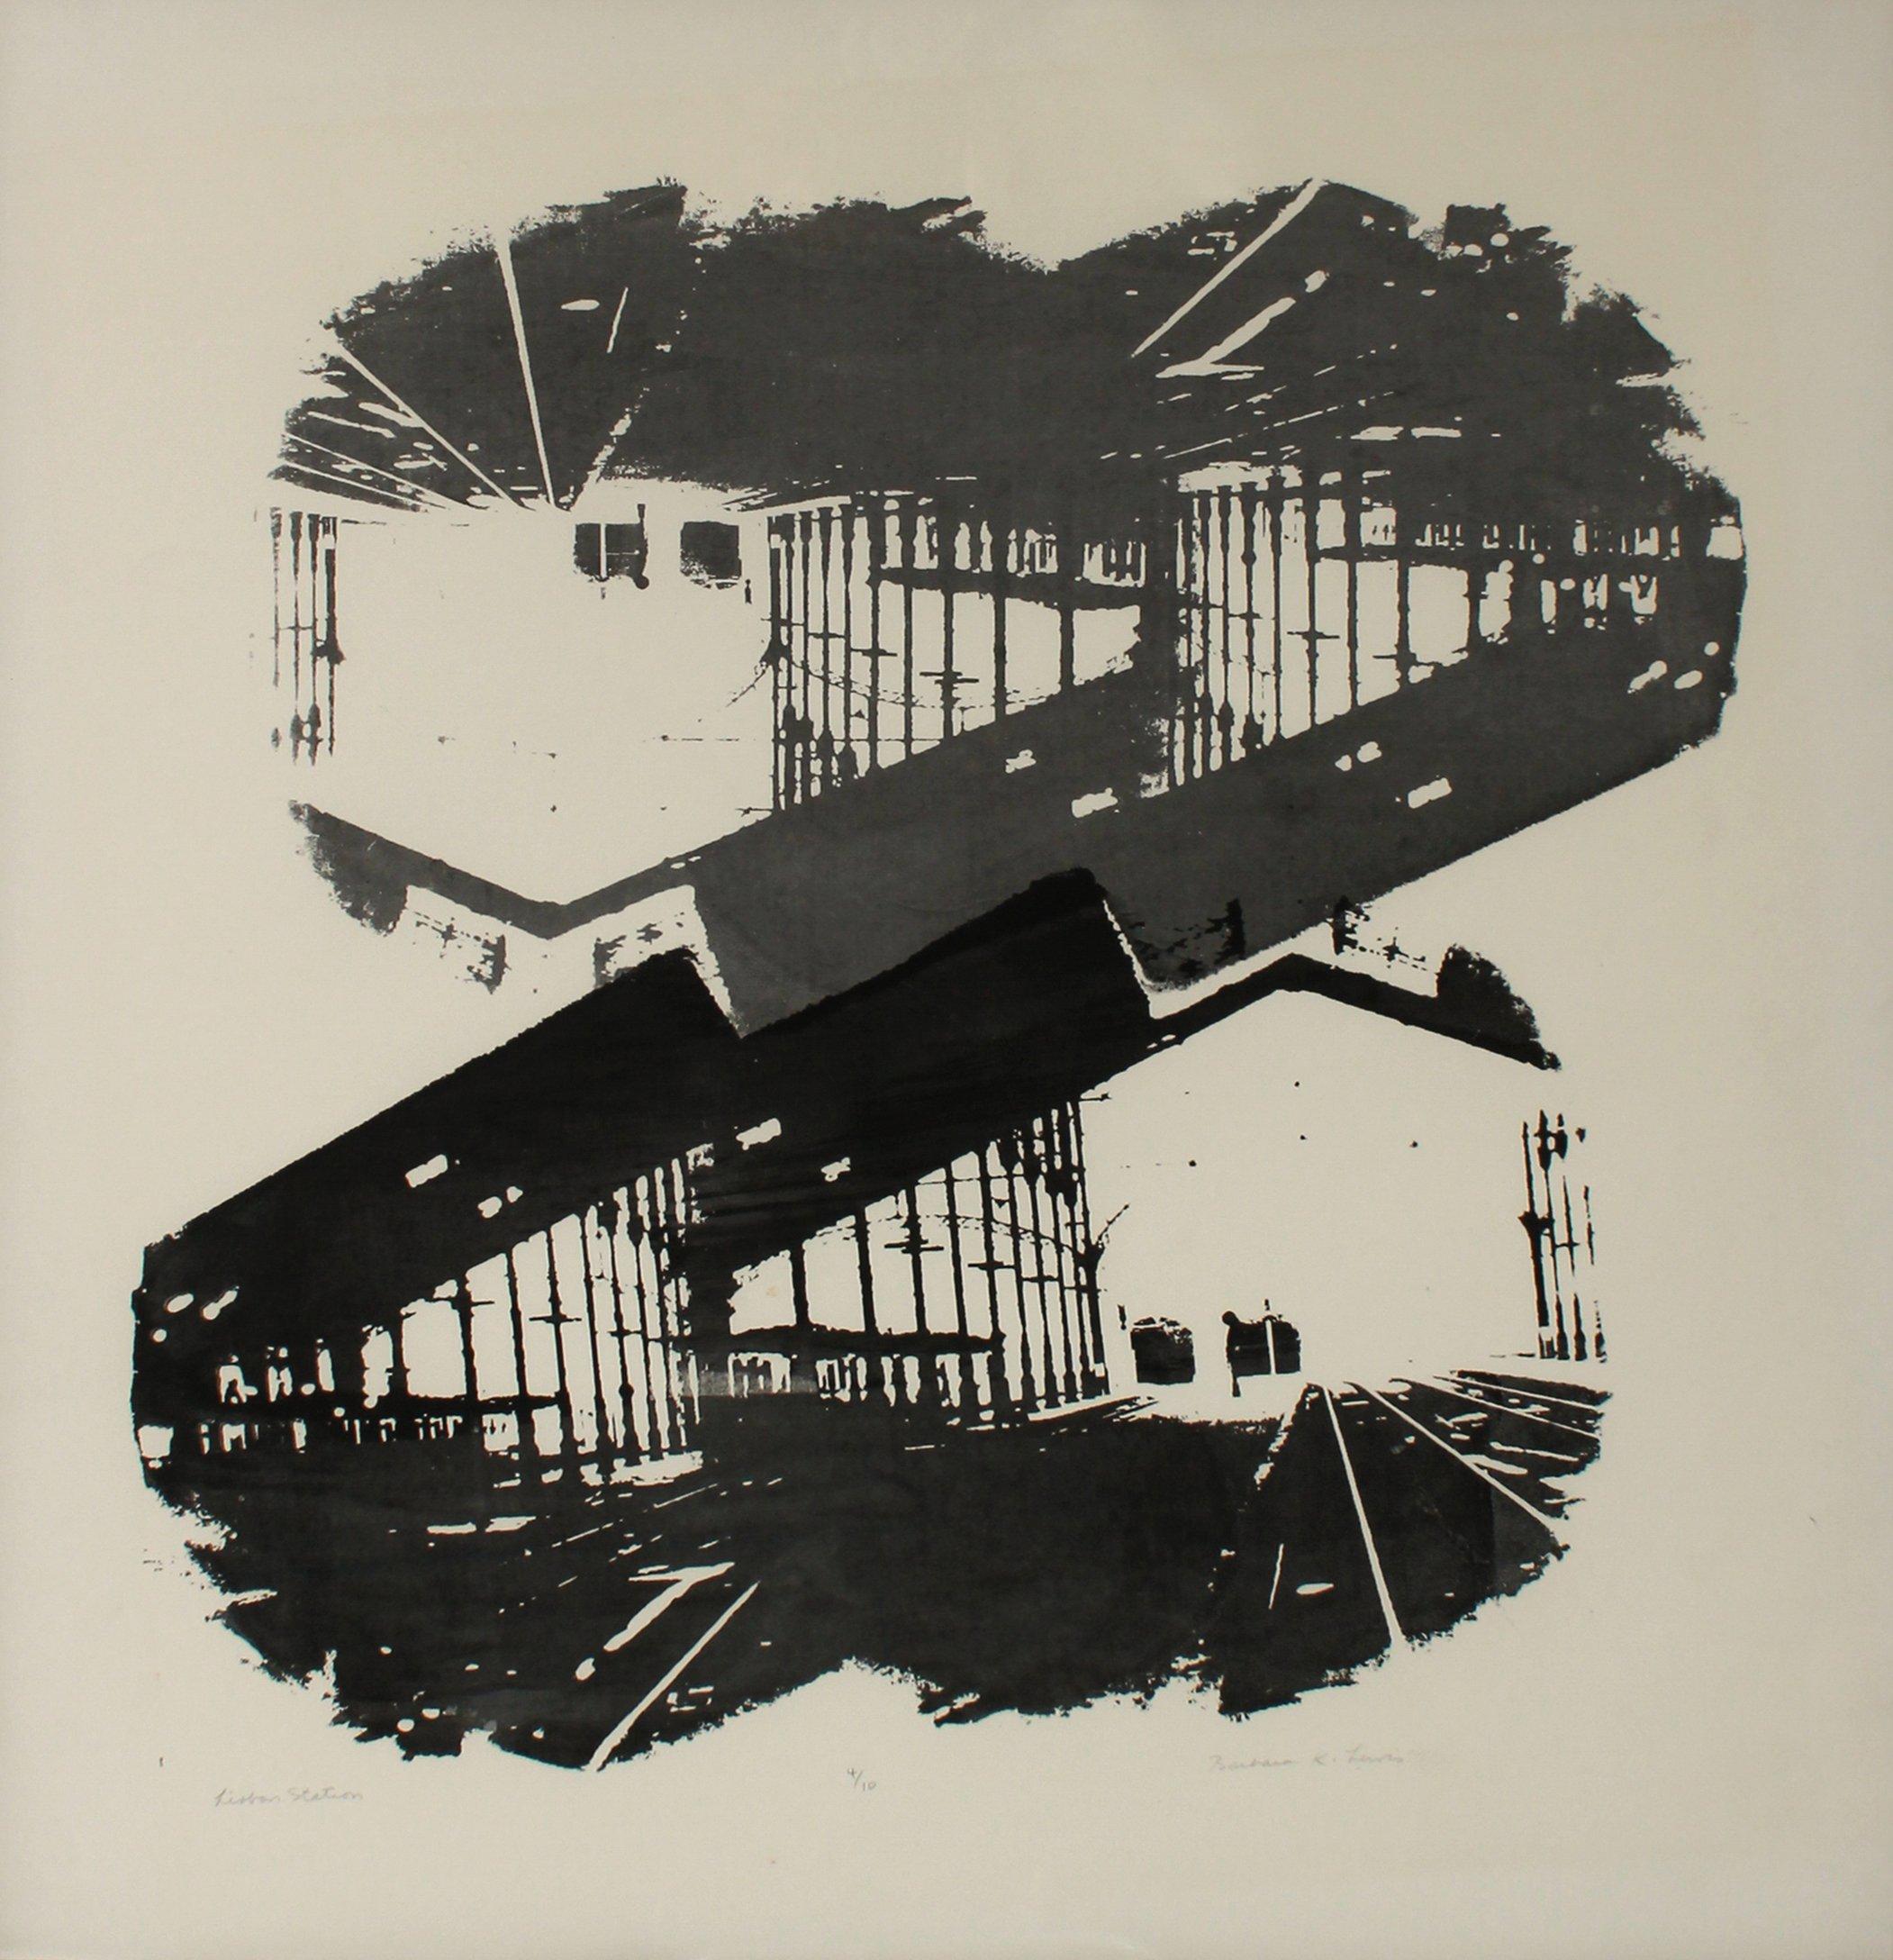 This 1971 graphic black and white abstracted city detail entitled 